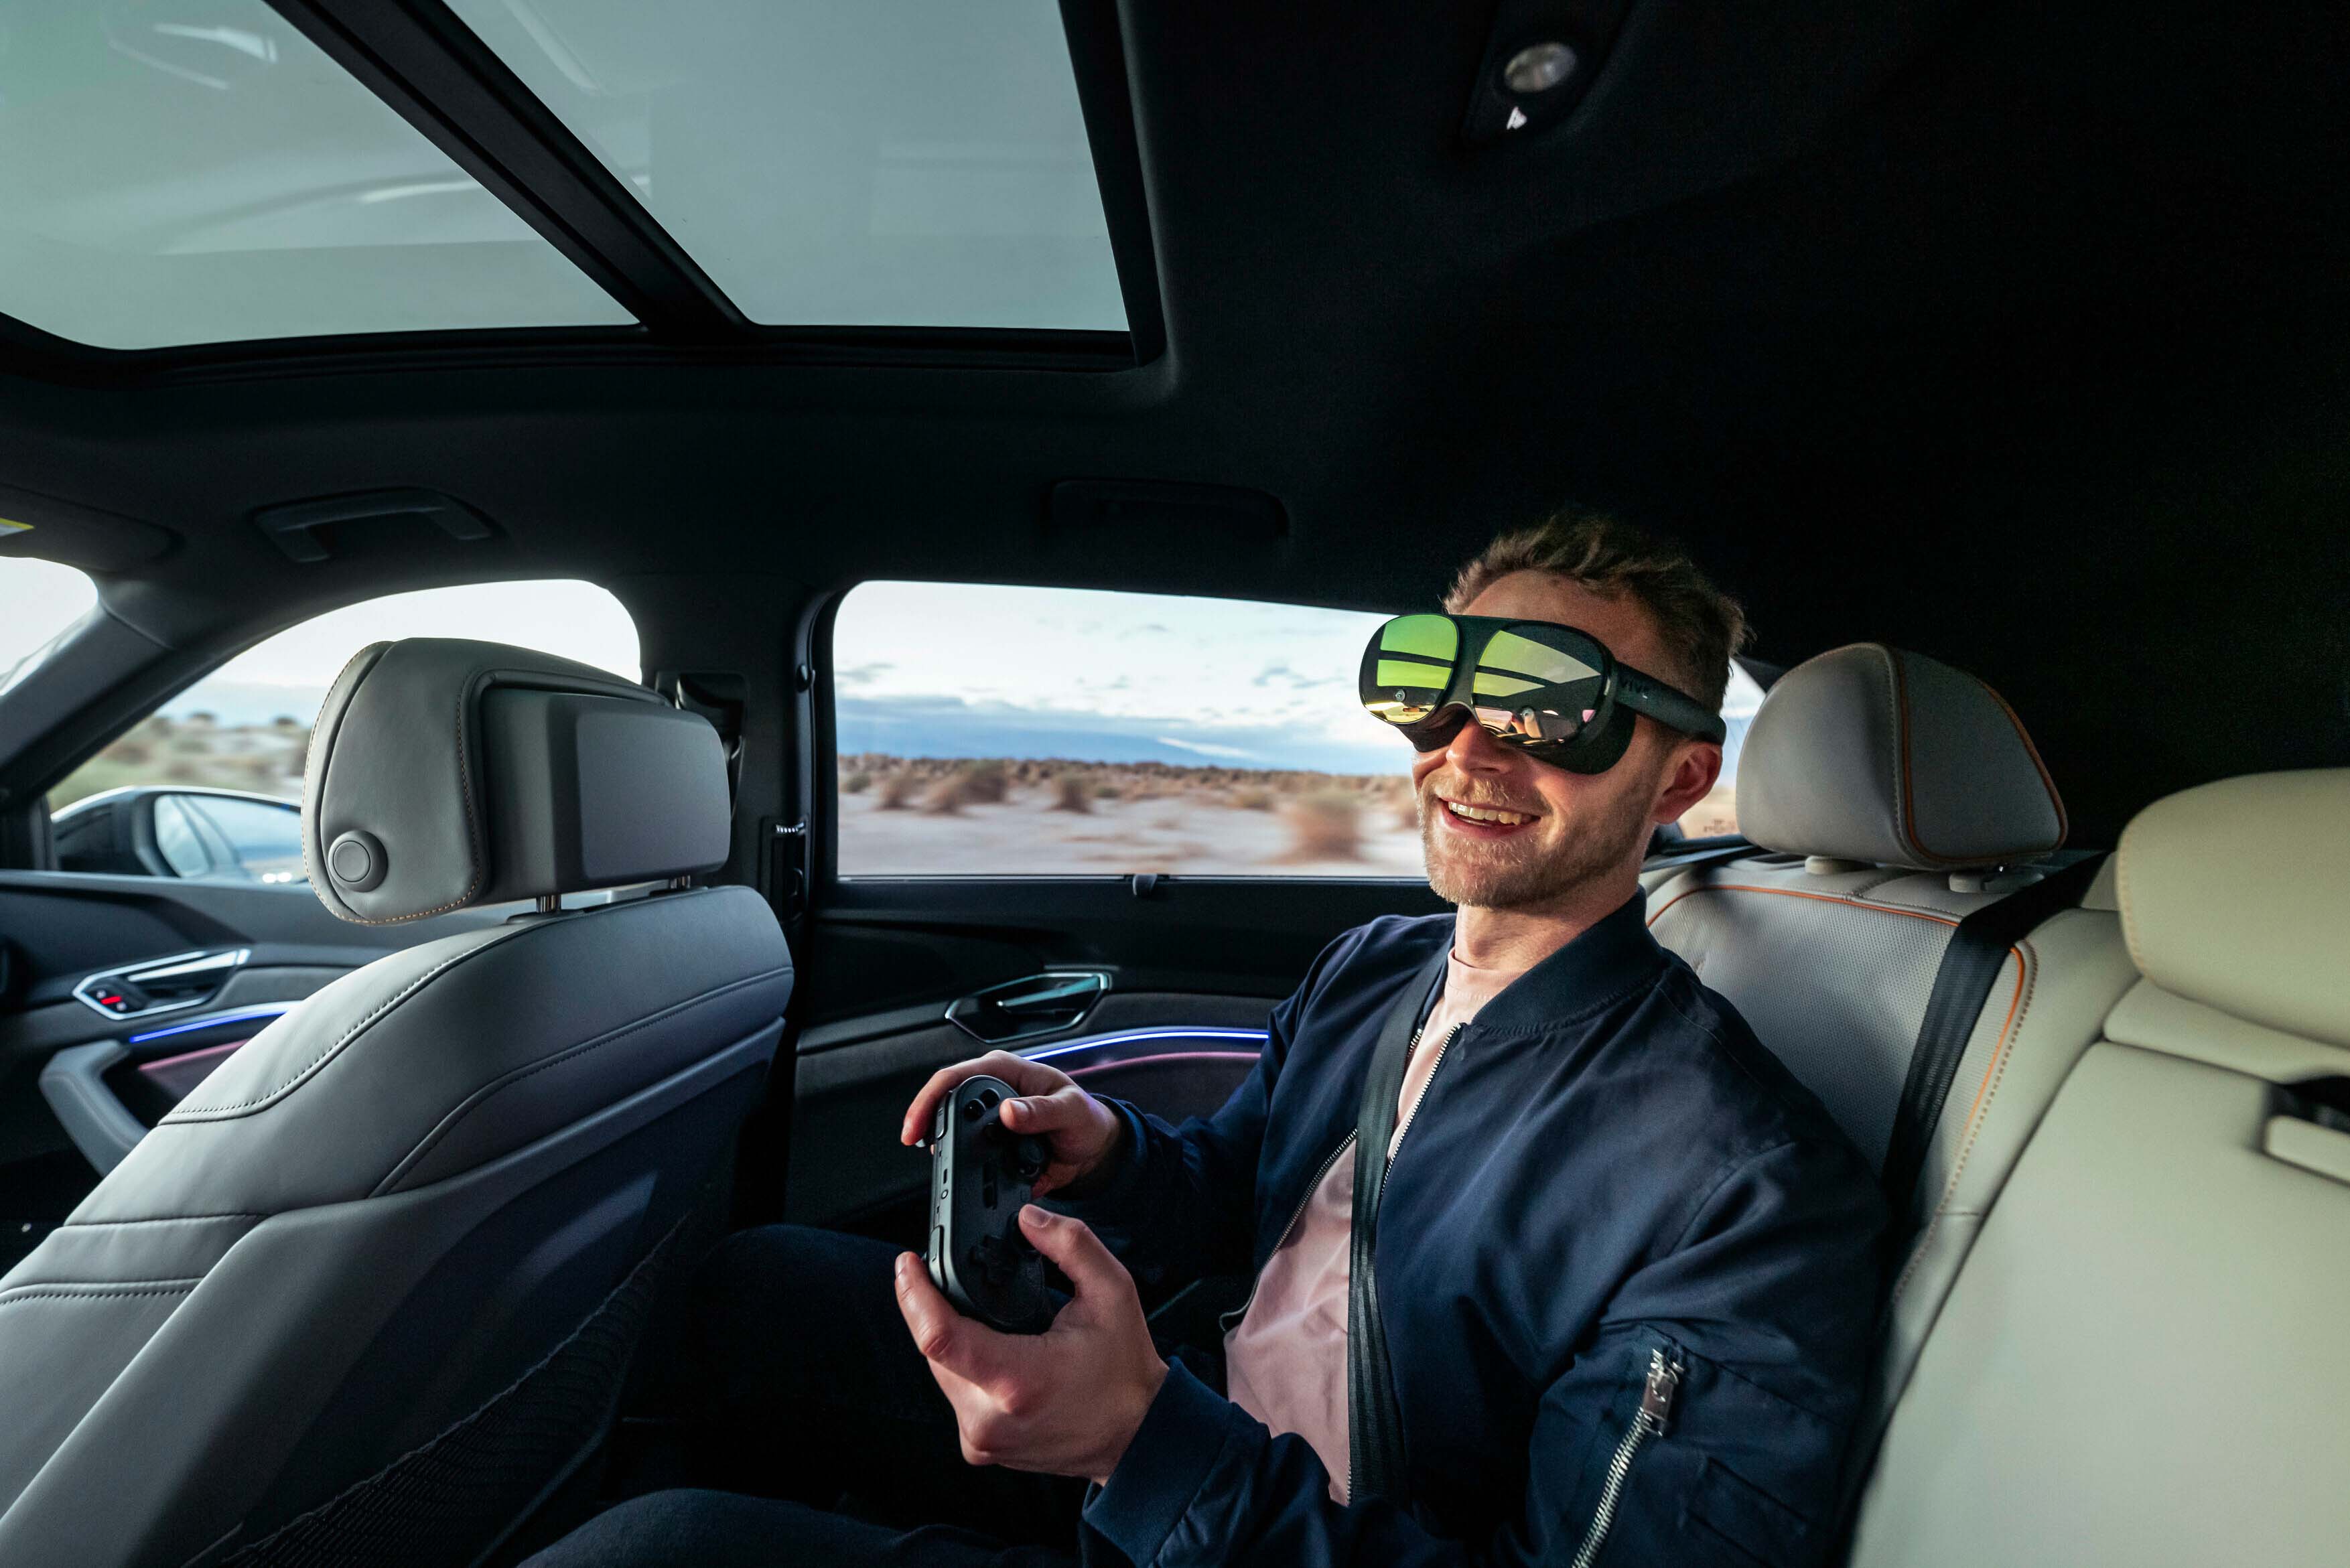 In the future, we could expect to see further uses of virtual, augmented and mixed reality in the car